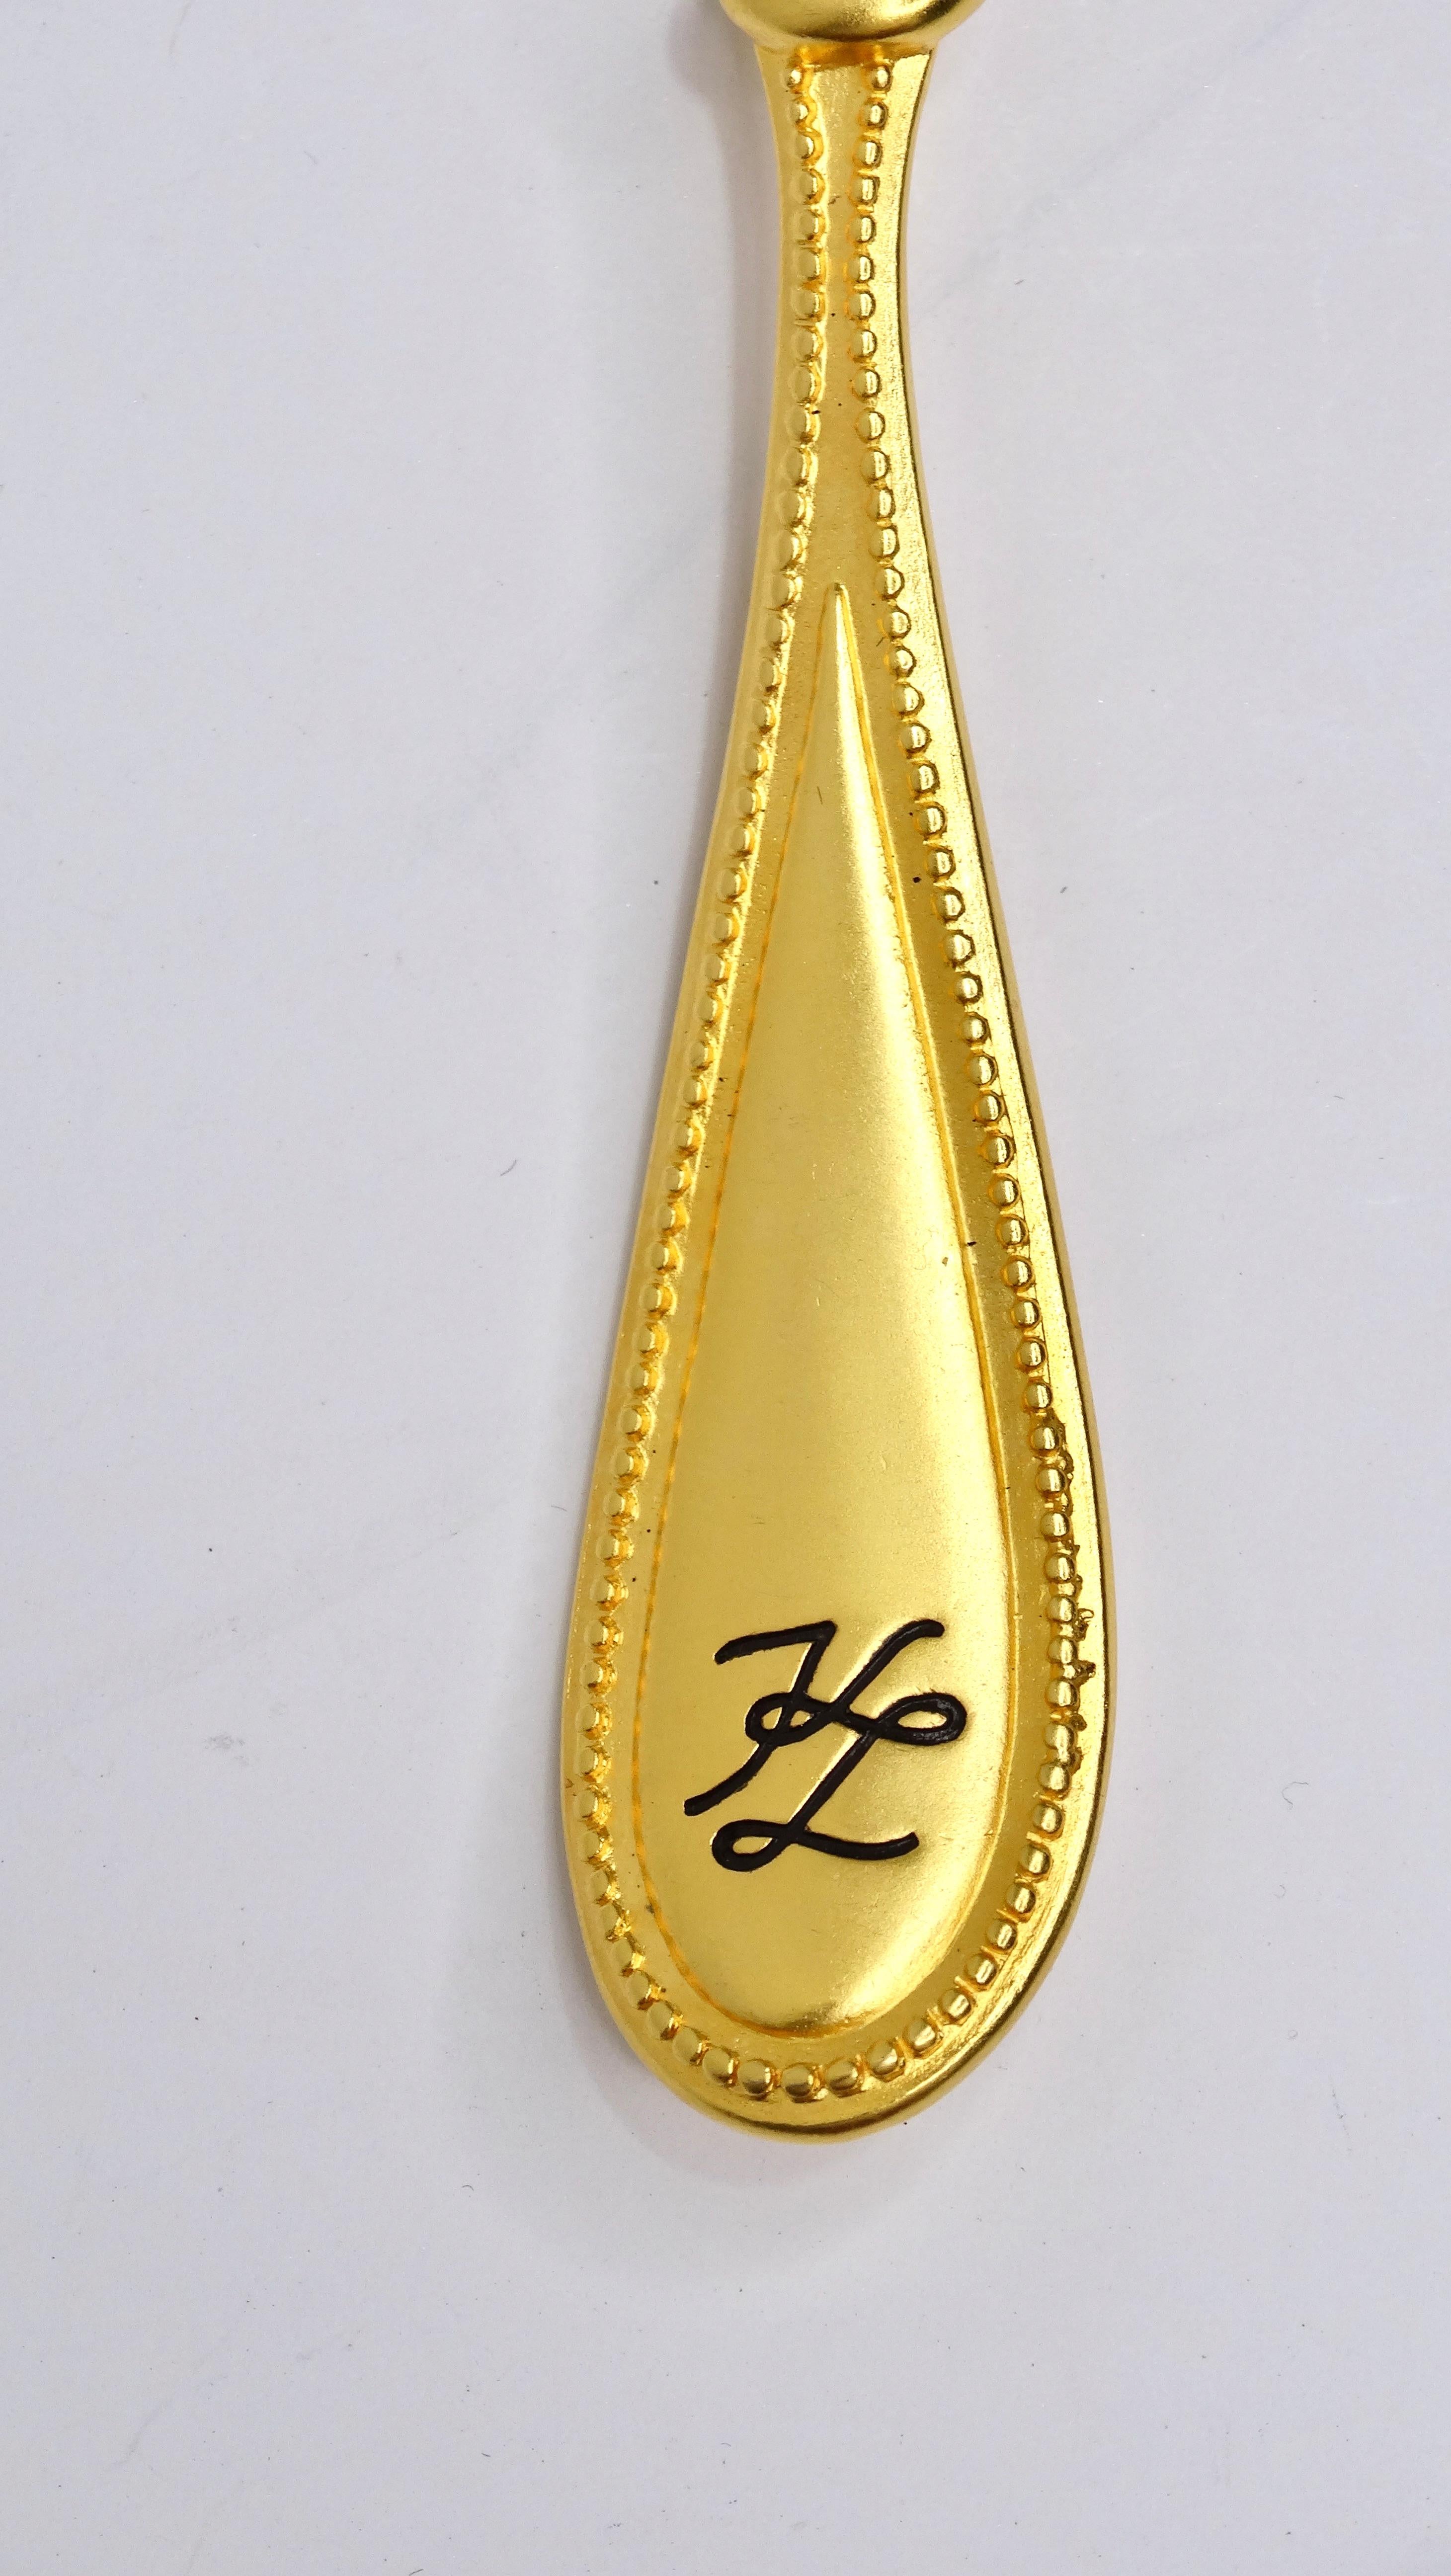 This is a spectacular brooch from the one and only Karl Lagerfeld! Calling all cooks and food lovers, this is the brooch for you! This is a rare collectors piece you need to get your hands on! Karl Lagerfeld creates a culinary delight with this